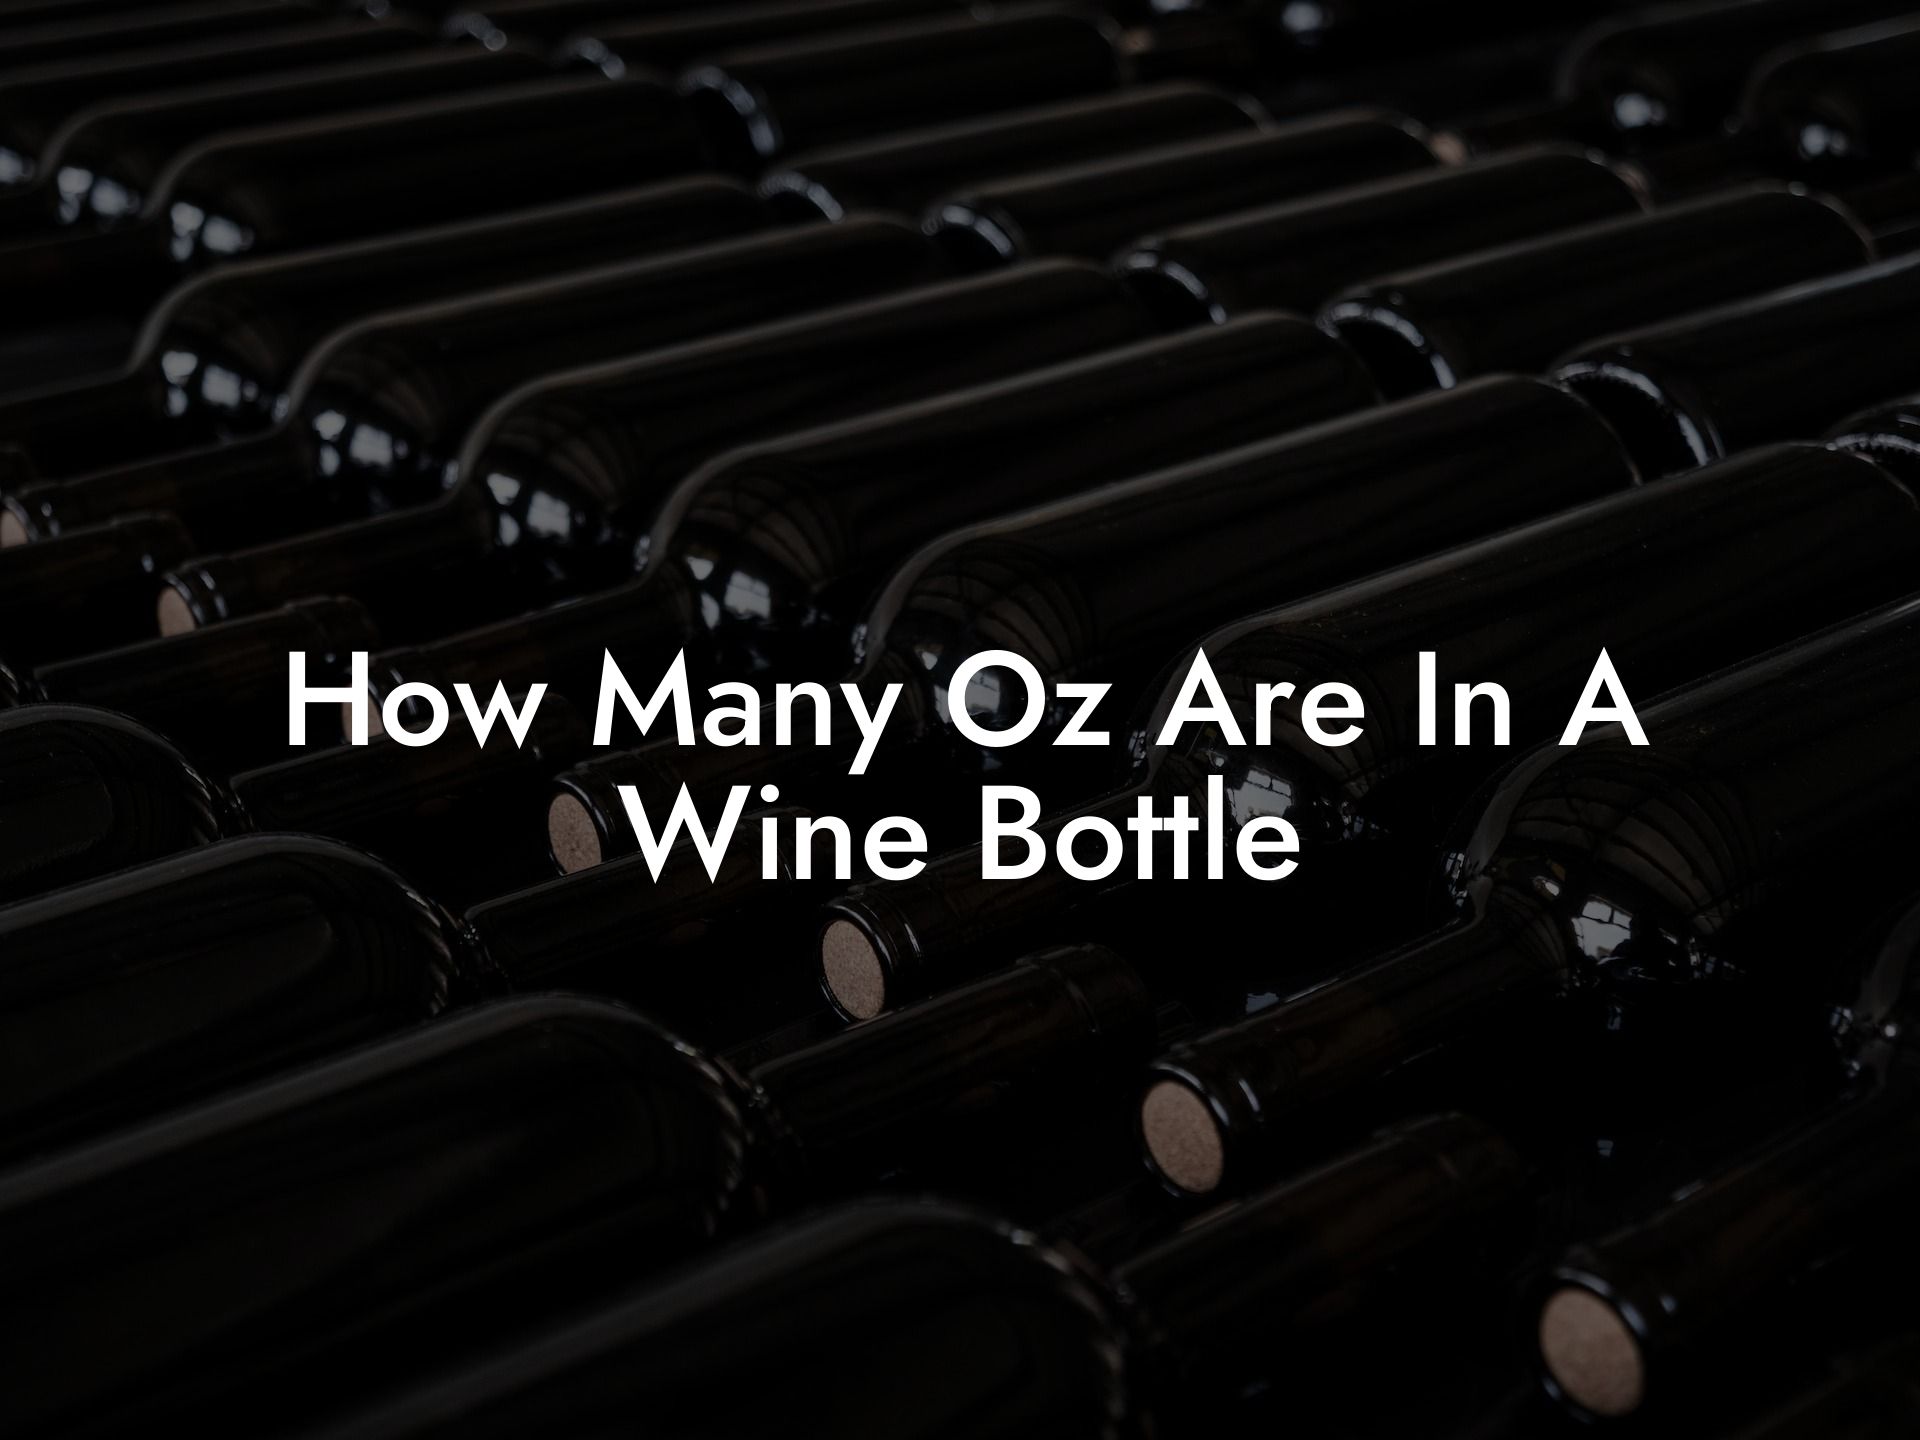 How Many Oz Are In A Wine Bottle